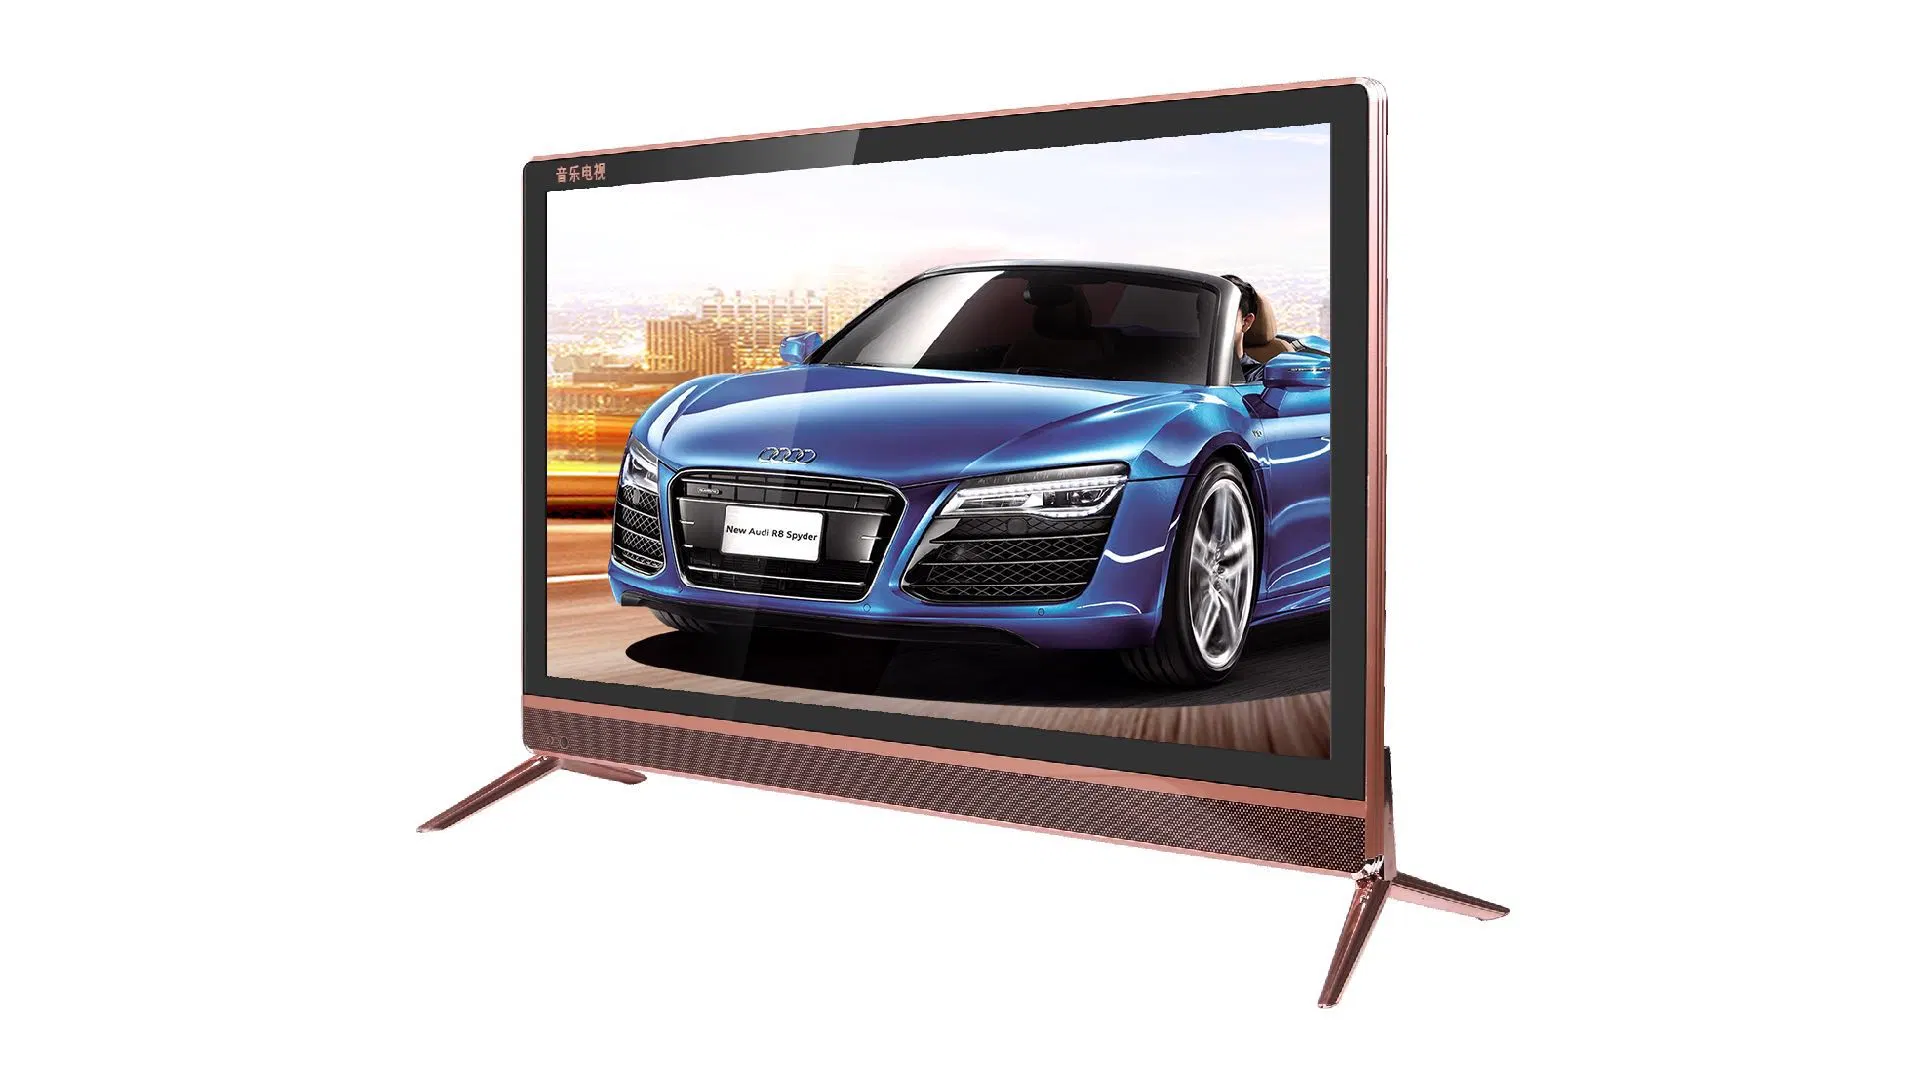 40 43 Inch TFT LCD Smart HD Television LCD LED TV